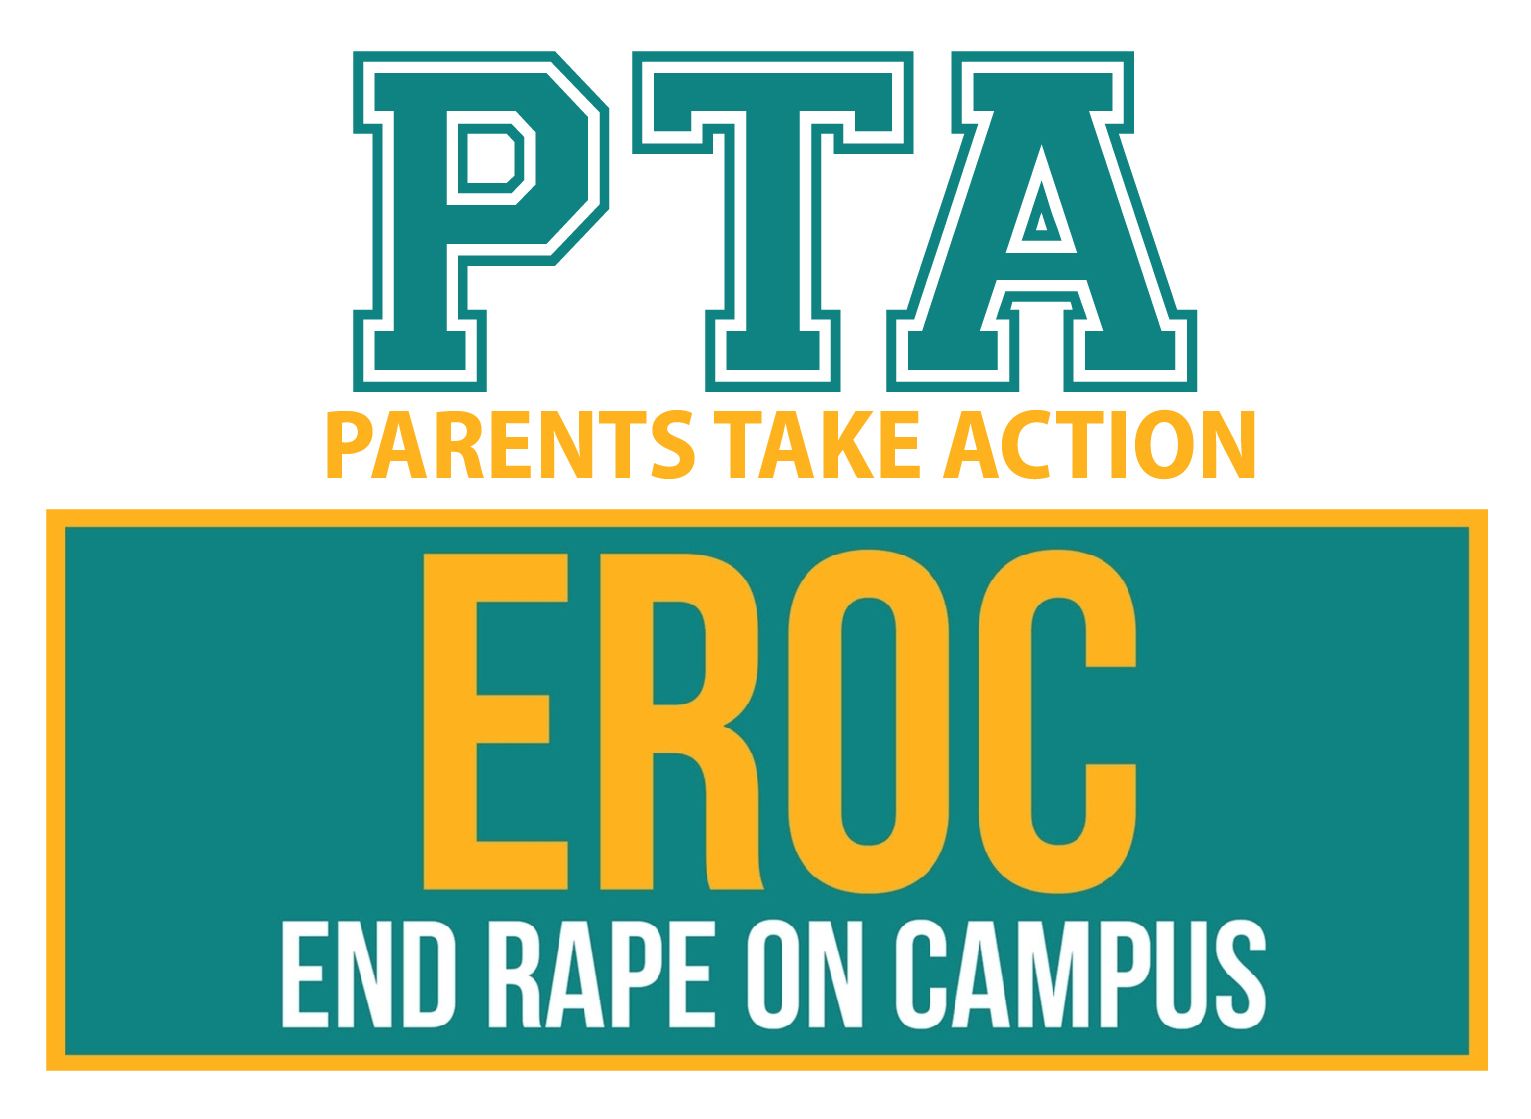 Parents Take Action to End Rape on Campus